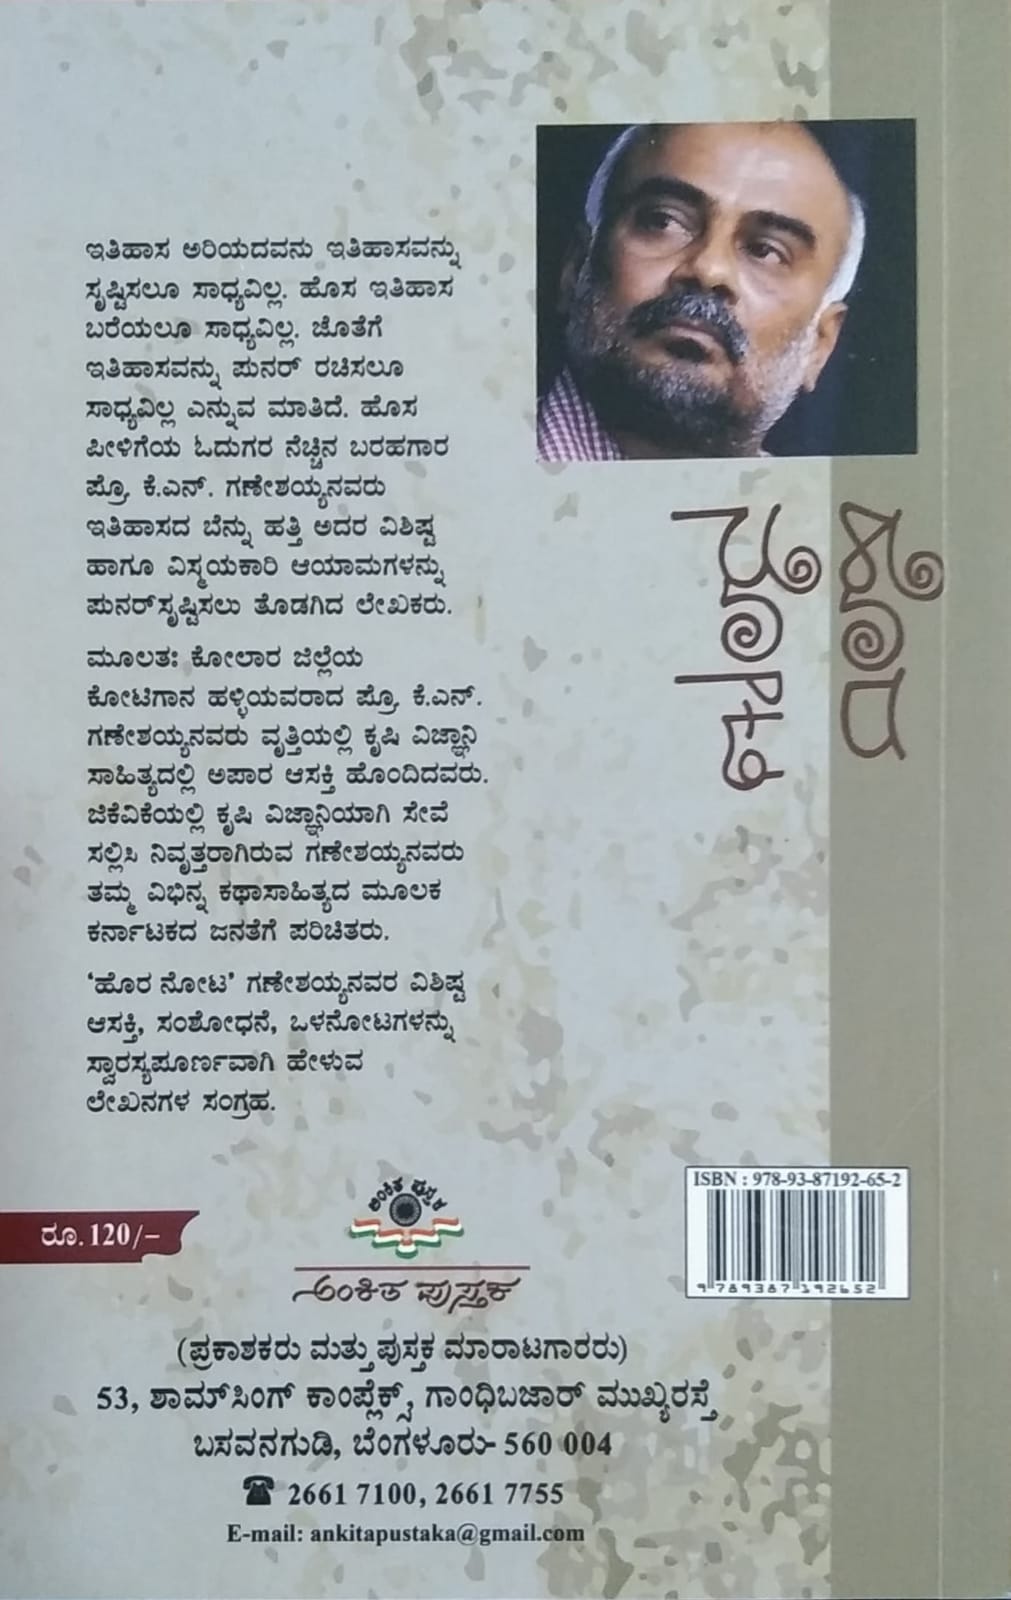 'Hora Nota' is a book of Collection of Articles written by Dr. K. N. Ganeshayya and Published by Ankita Pustaka